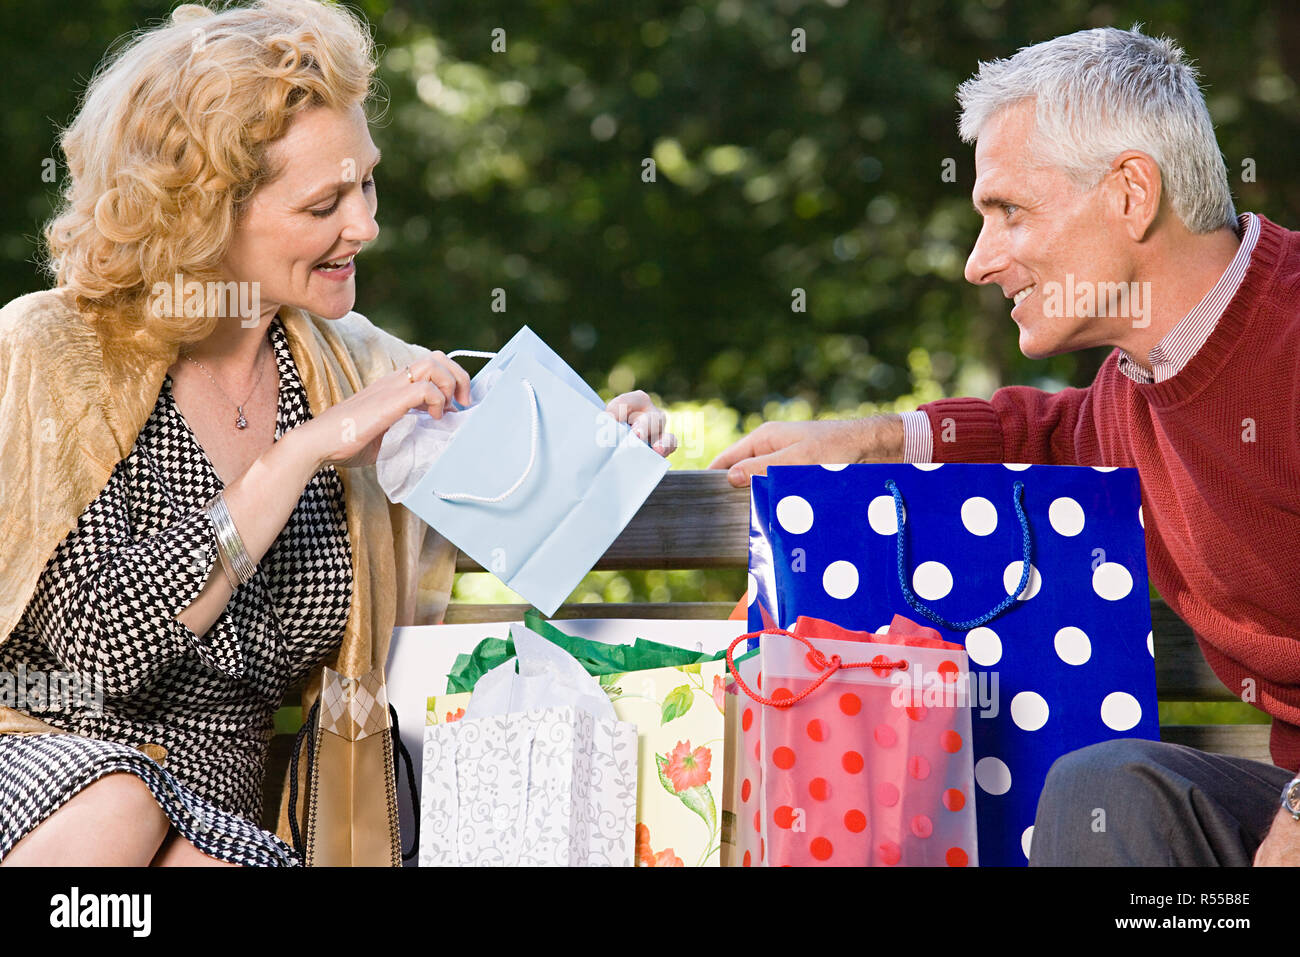 Woman looking in bag at gift from husband Stock Photo